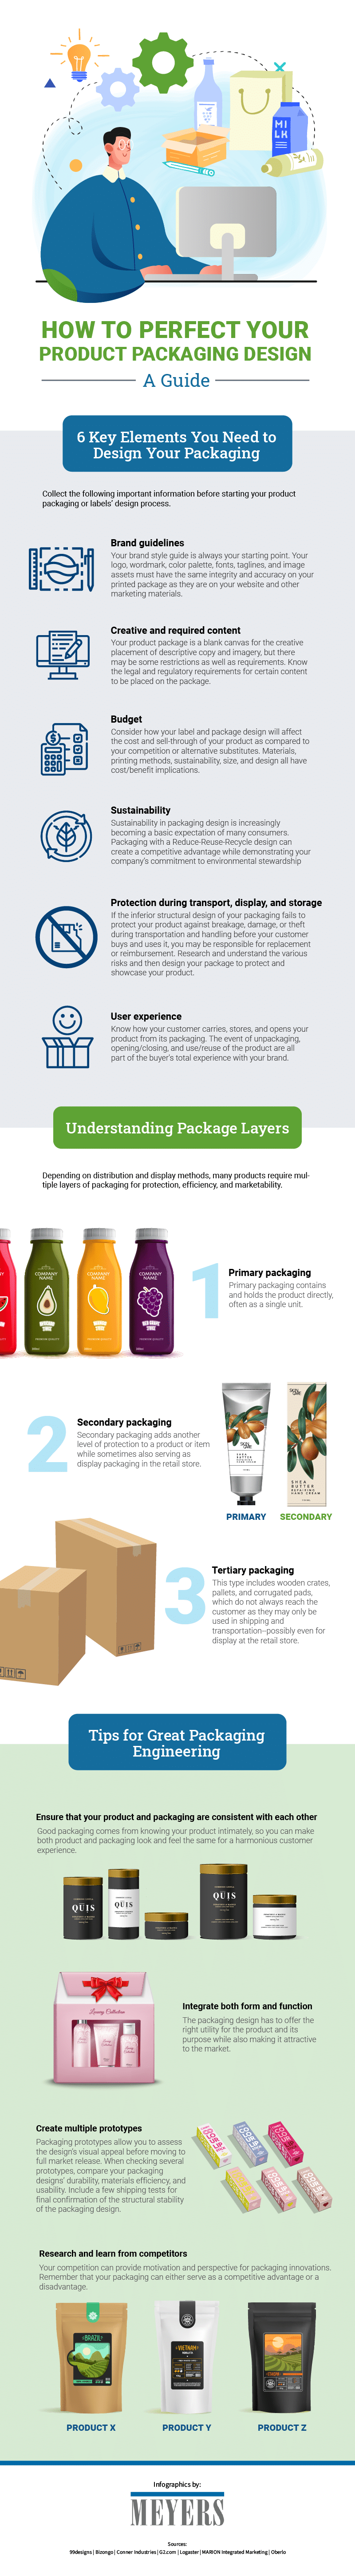 HOW TO PERFECT YOUR PRODUCT PACKAGING DESIGN: A GUIDE